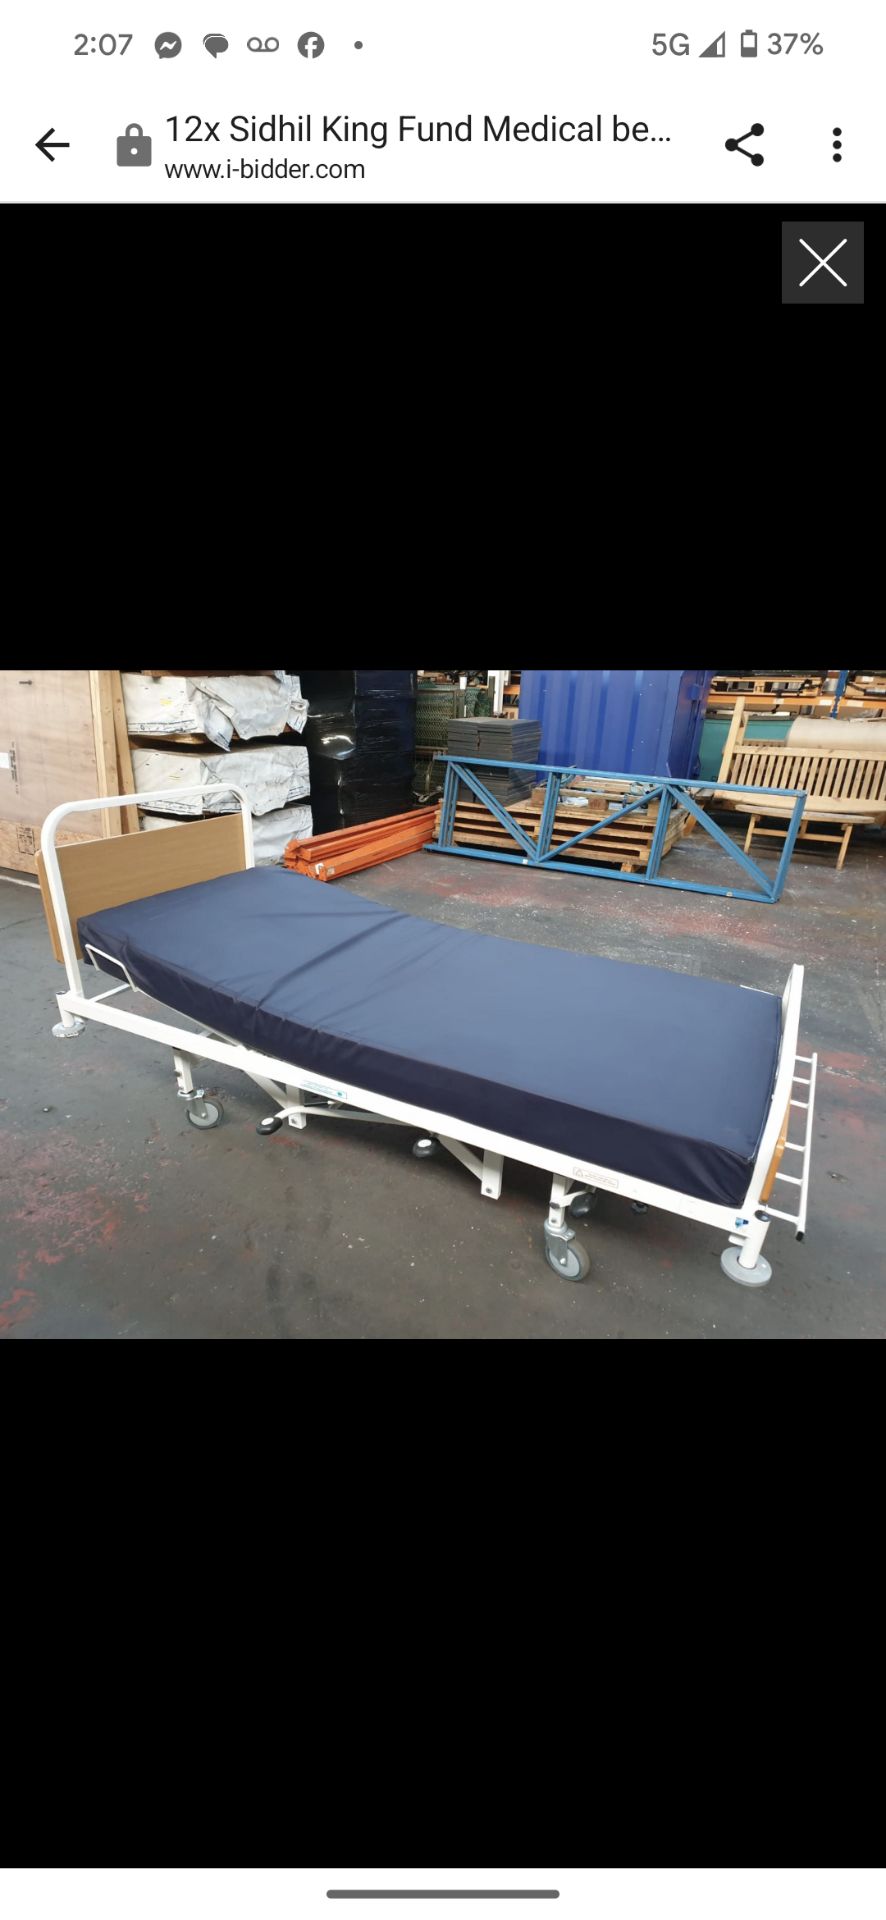 1 x Sidhil Kings Kund Hydraulic Hospital Bed With Mattress